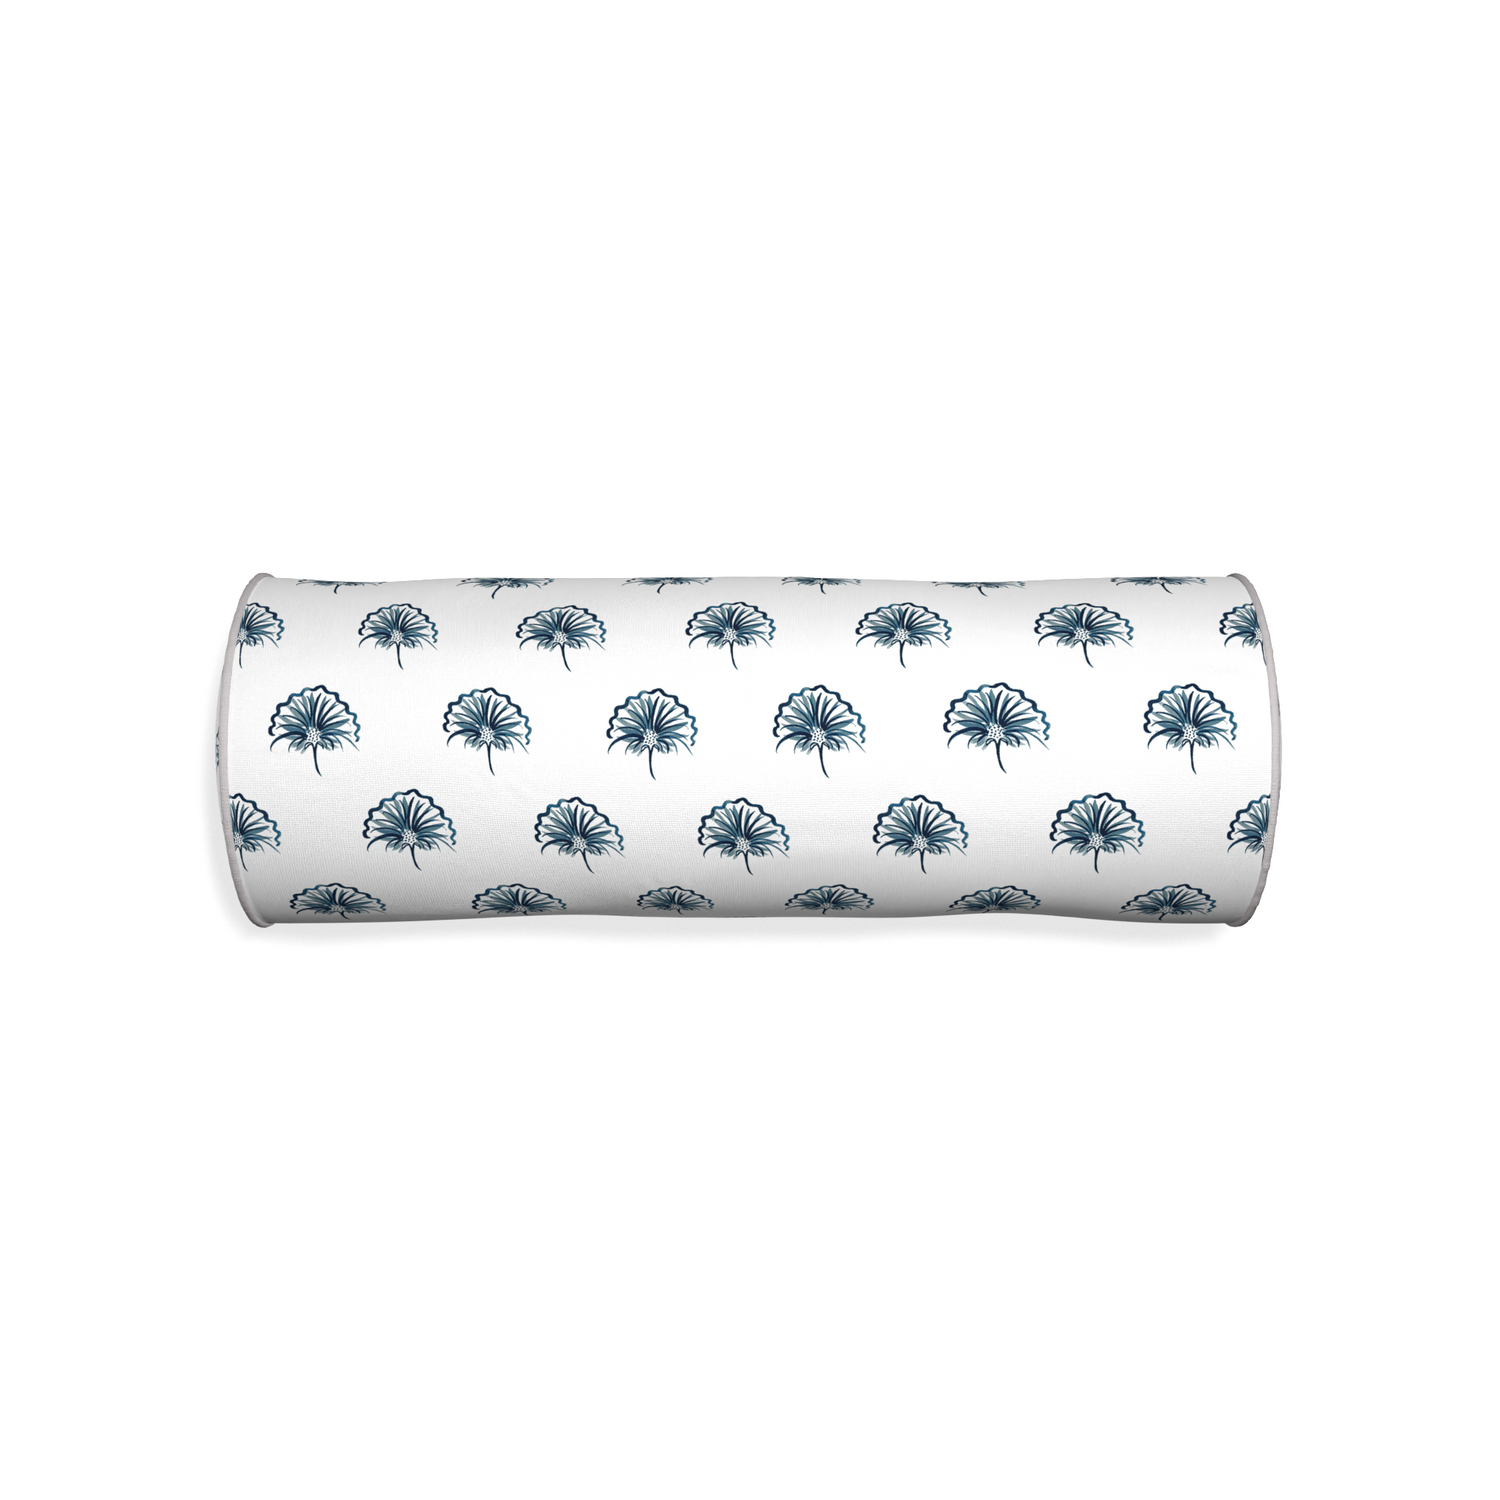 Bolster penelope midnight custom floral navypillow with pebble piping on white background